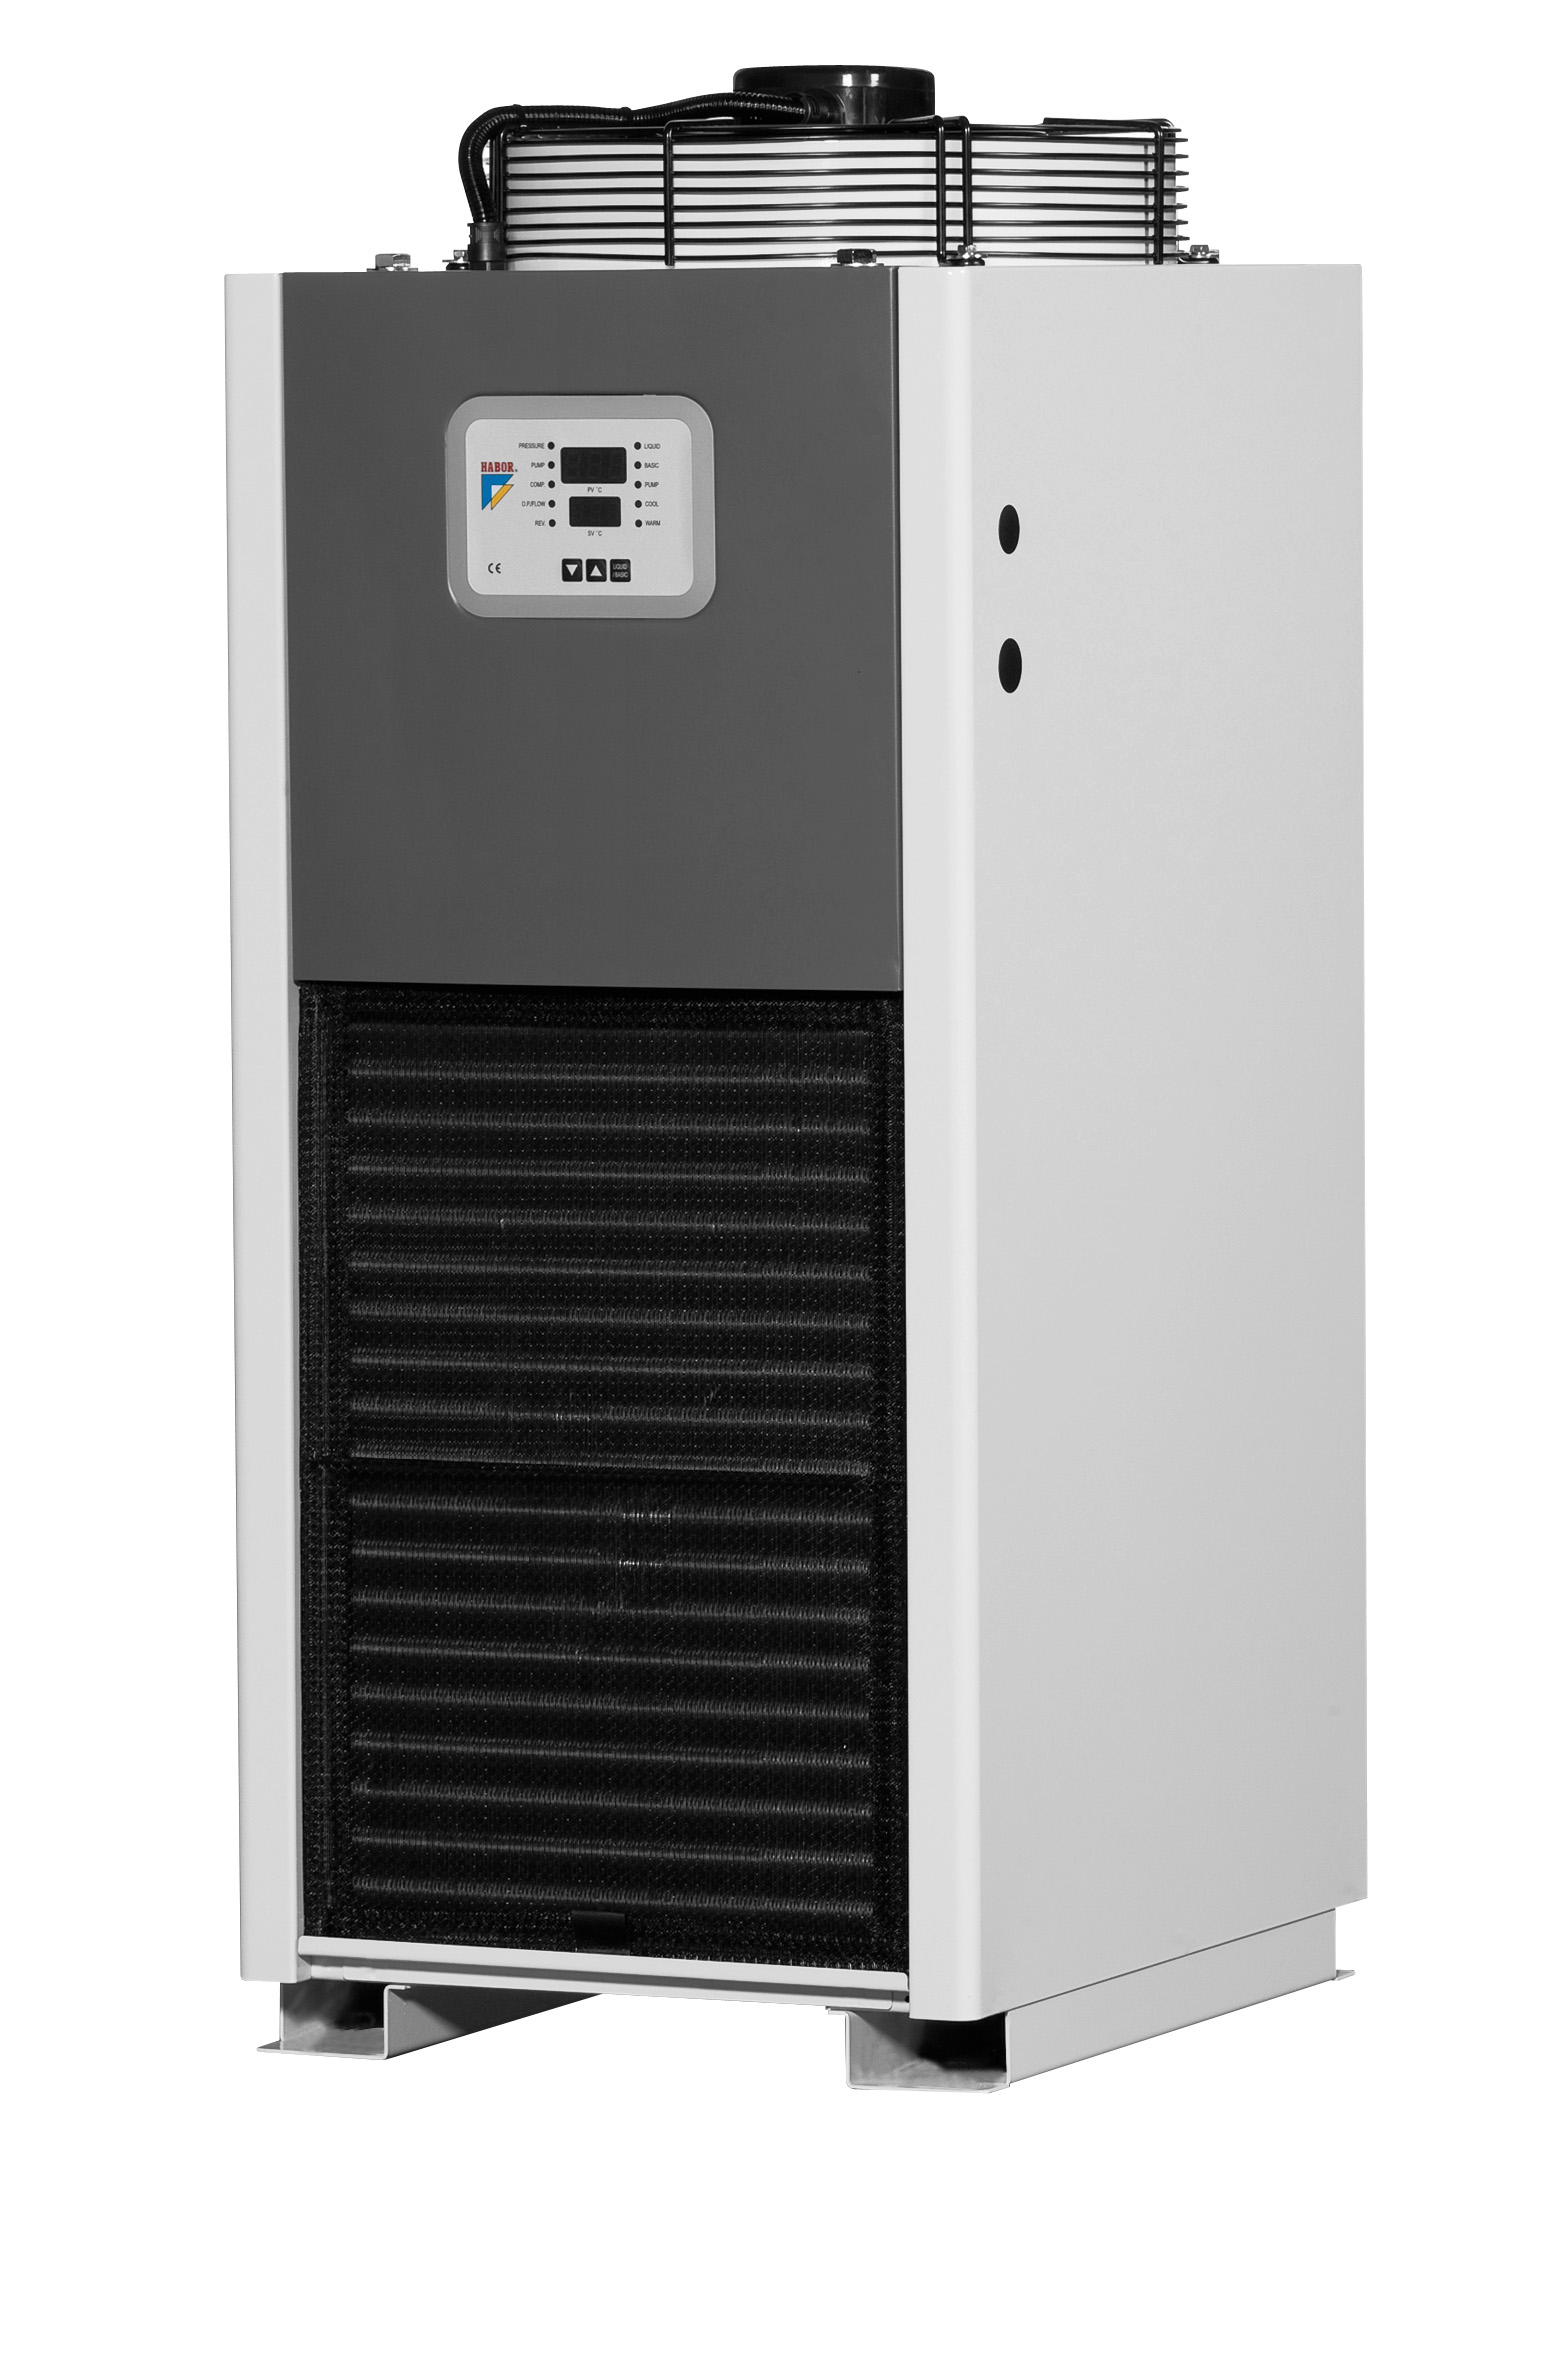 
                                Habor- High Accuracy Oil Cooler / Chiller
                            